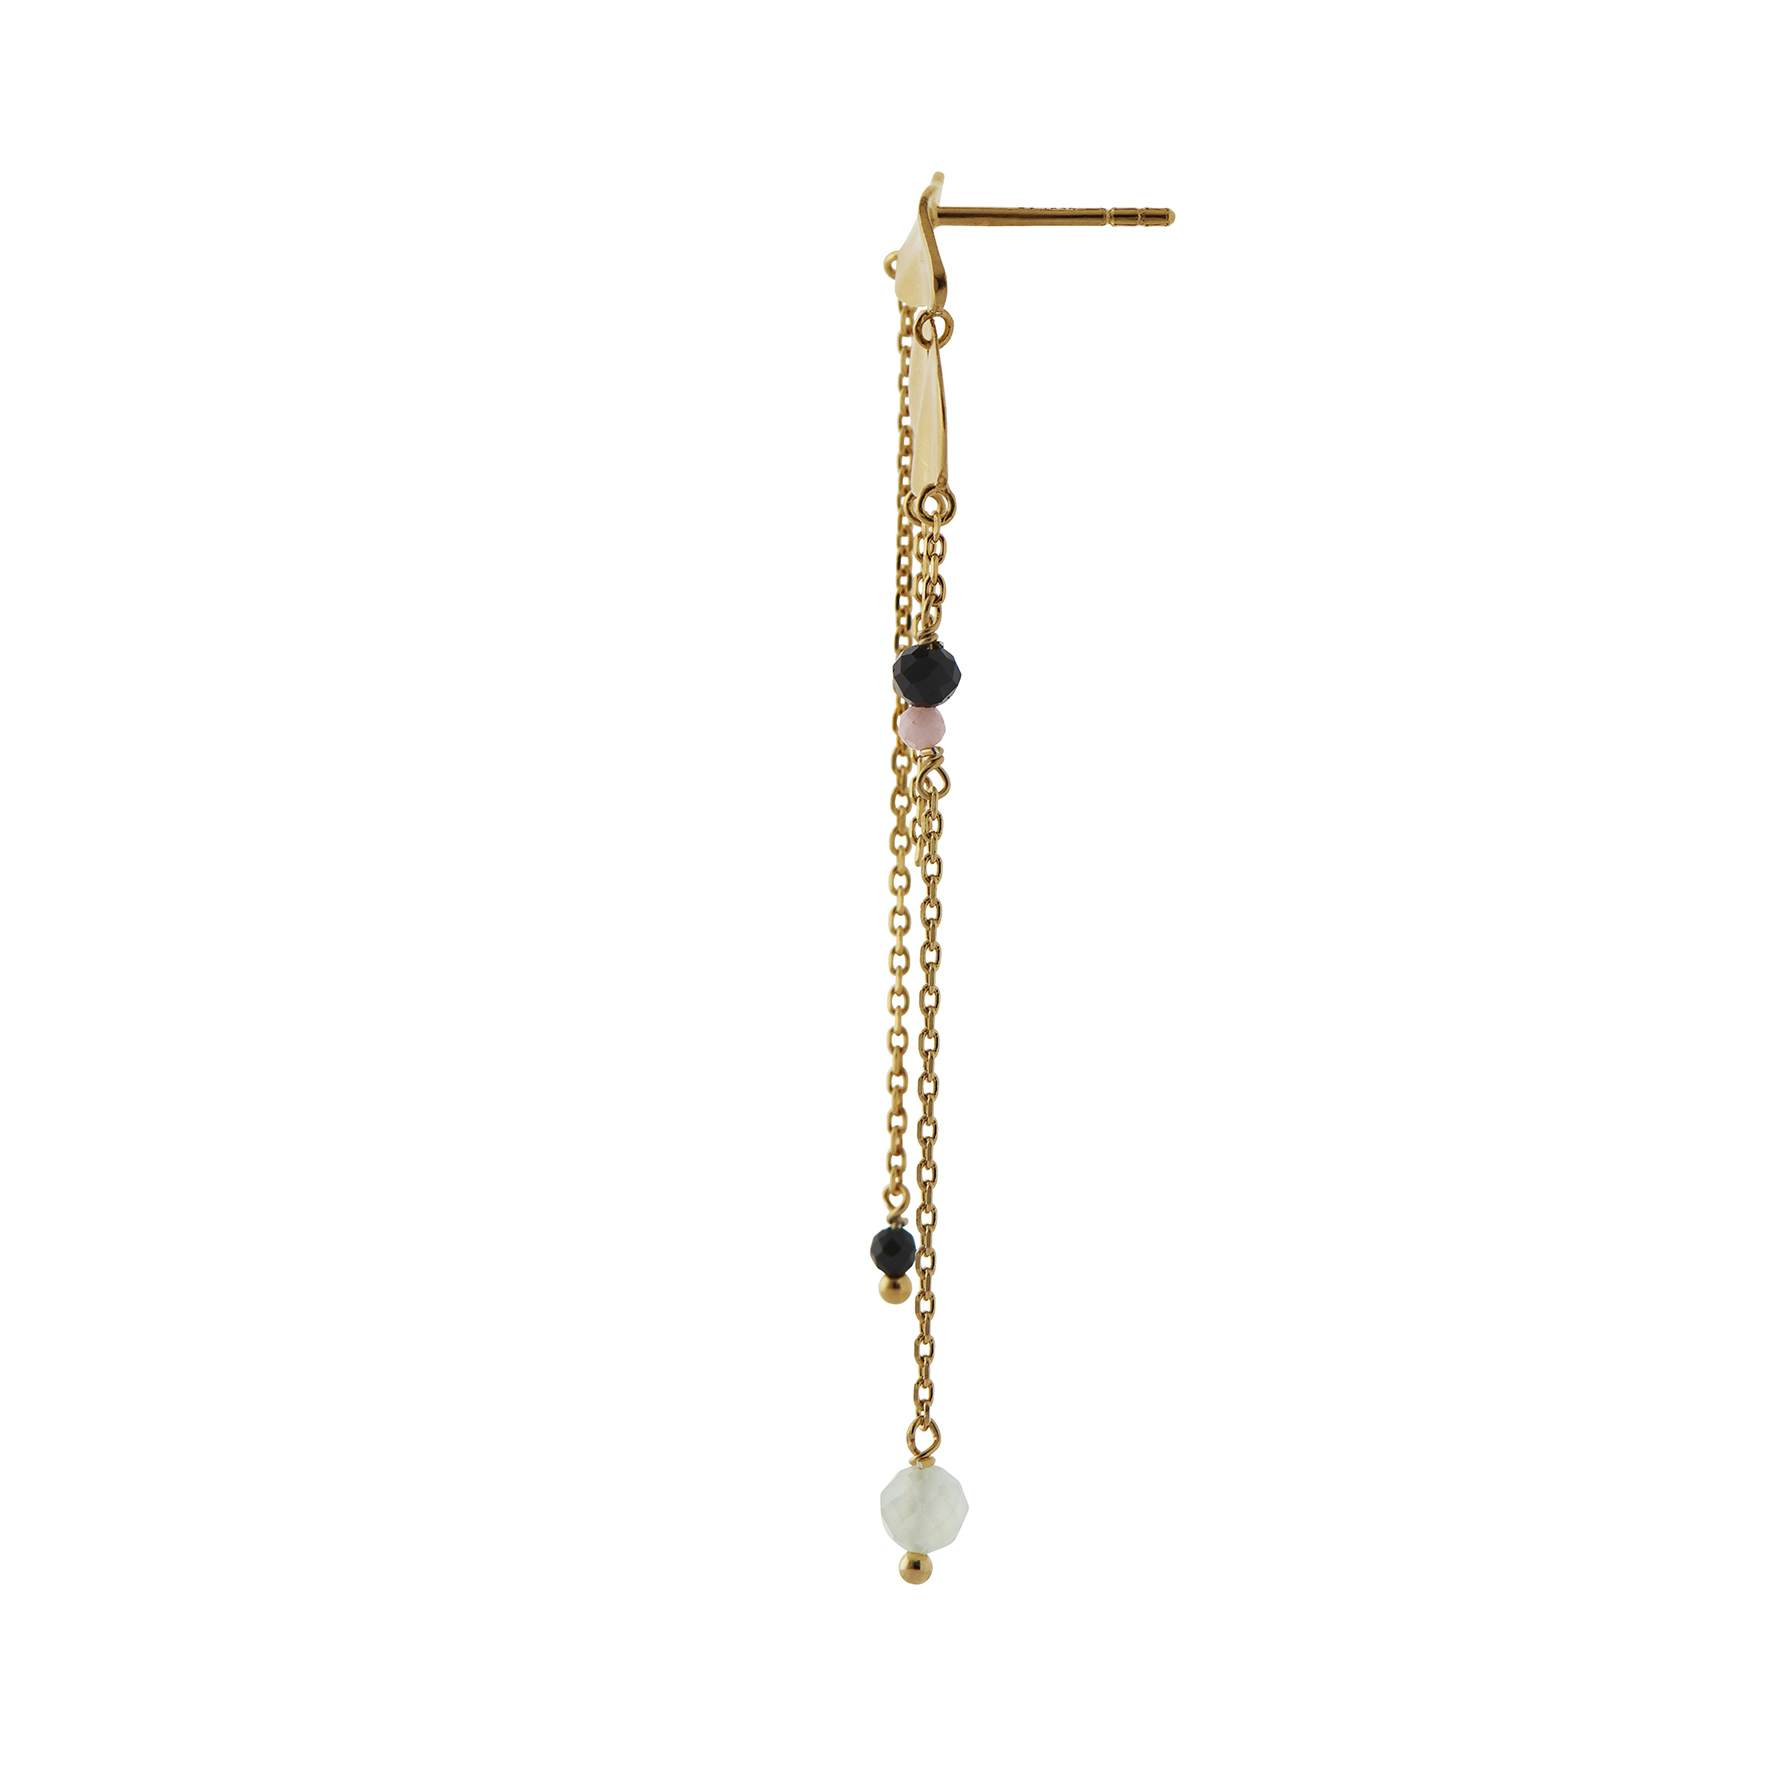 Festive Clear Sea Earring With Chains & Stones from STINE A Jewelry in Goldplated-Silver Sterling 925